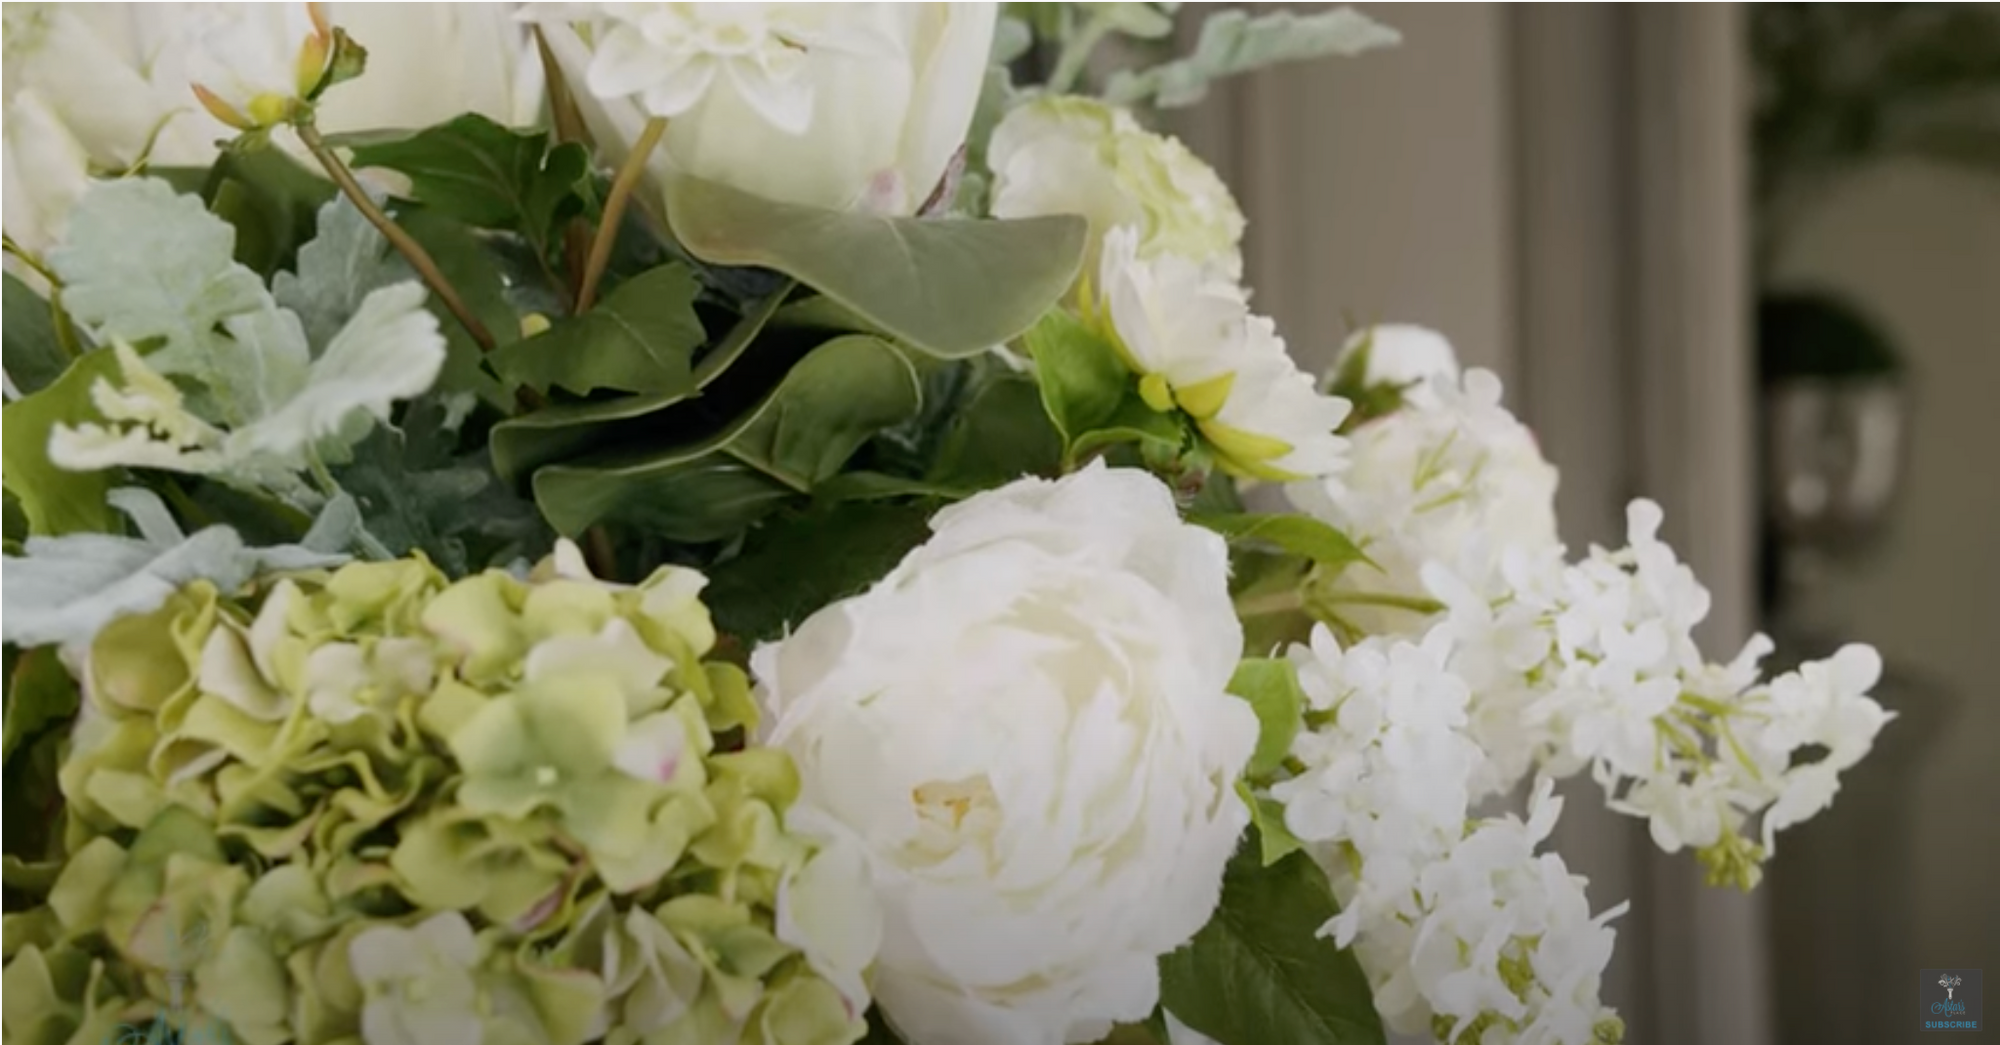 How to Balance and Harmonise White and Green Flower Designs